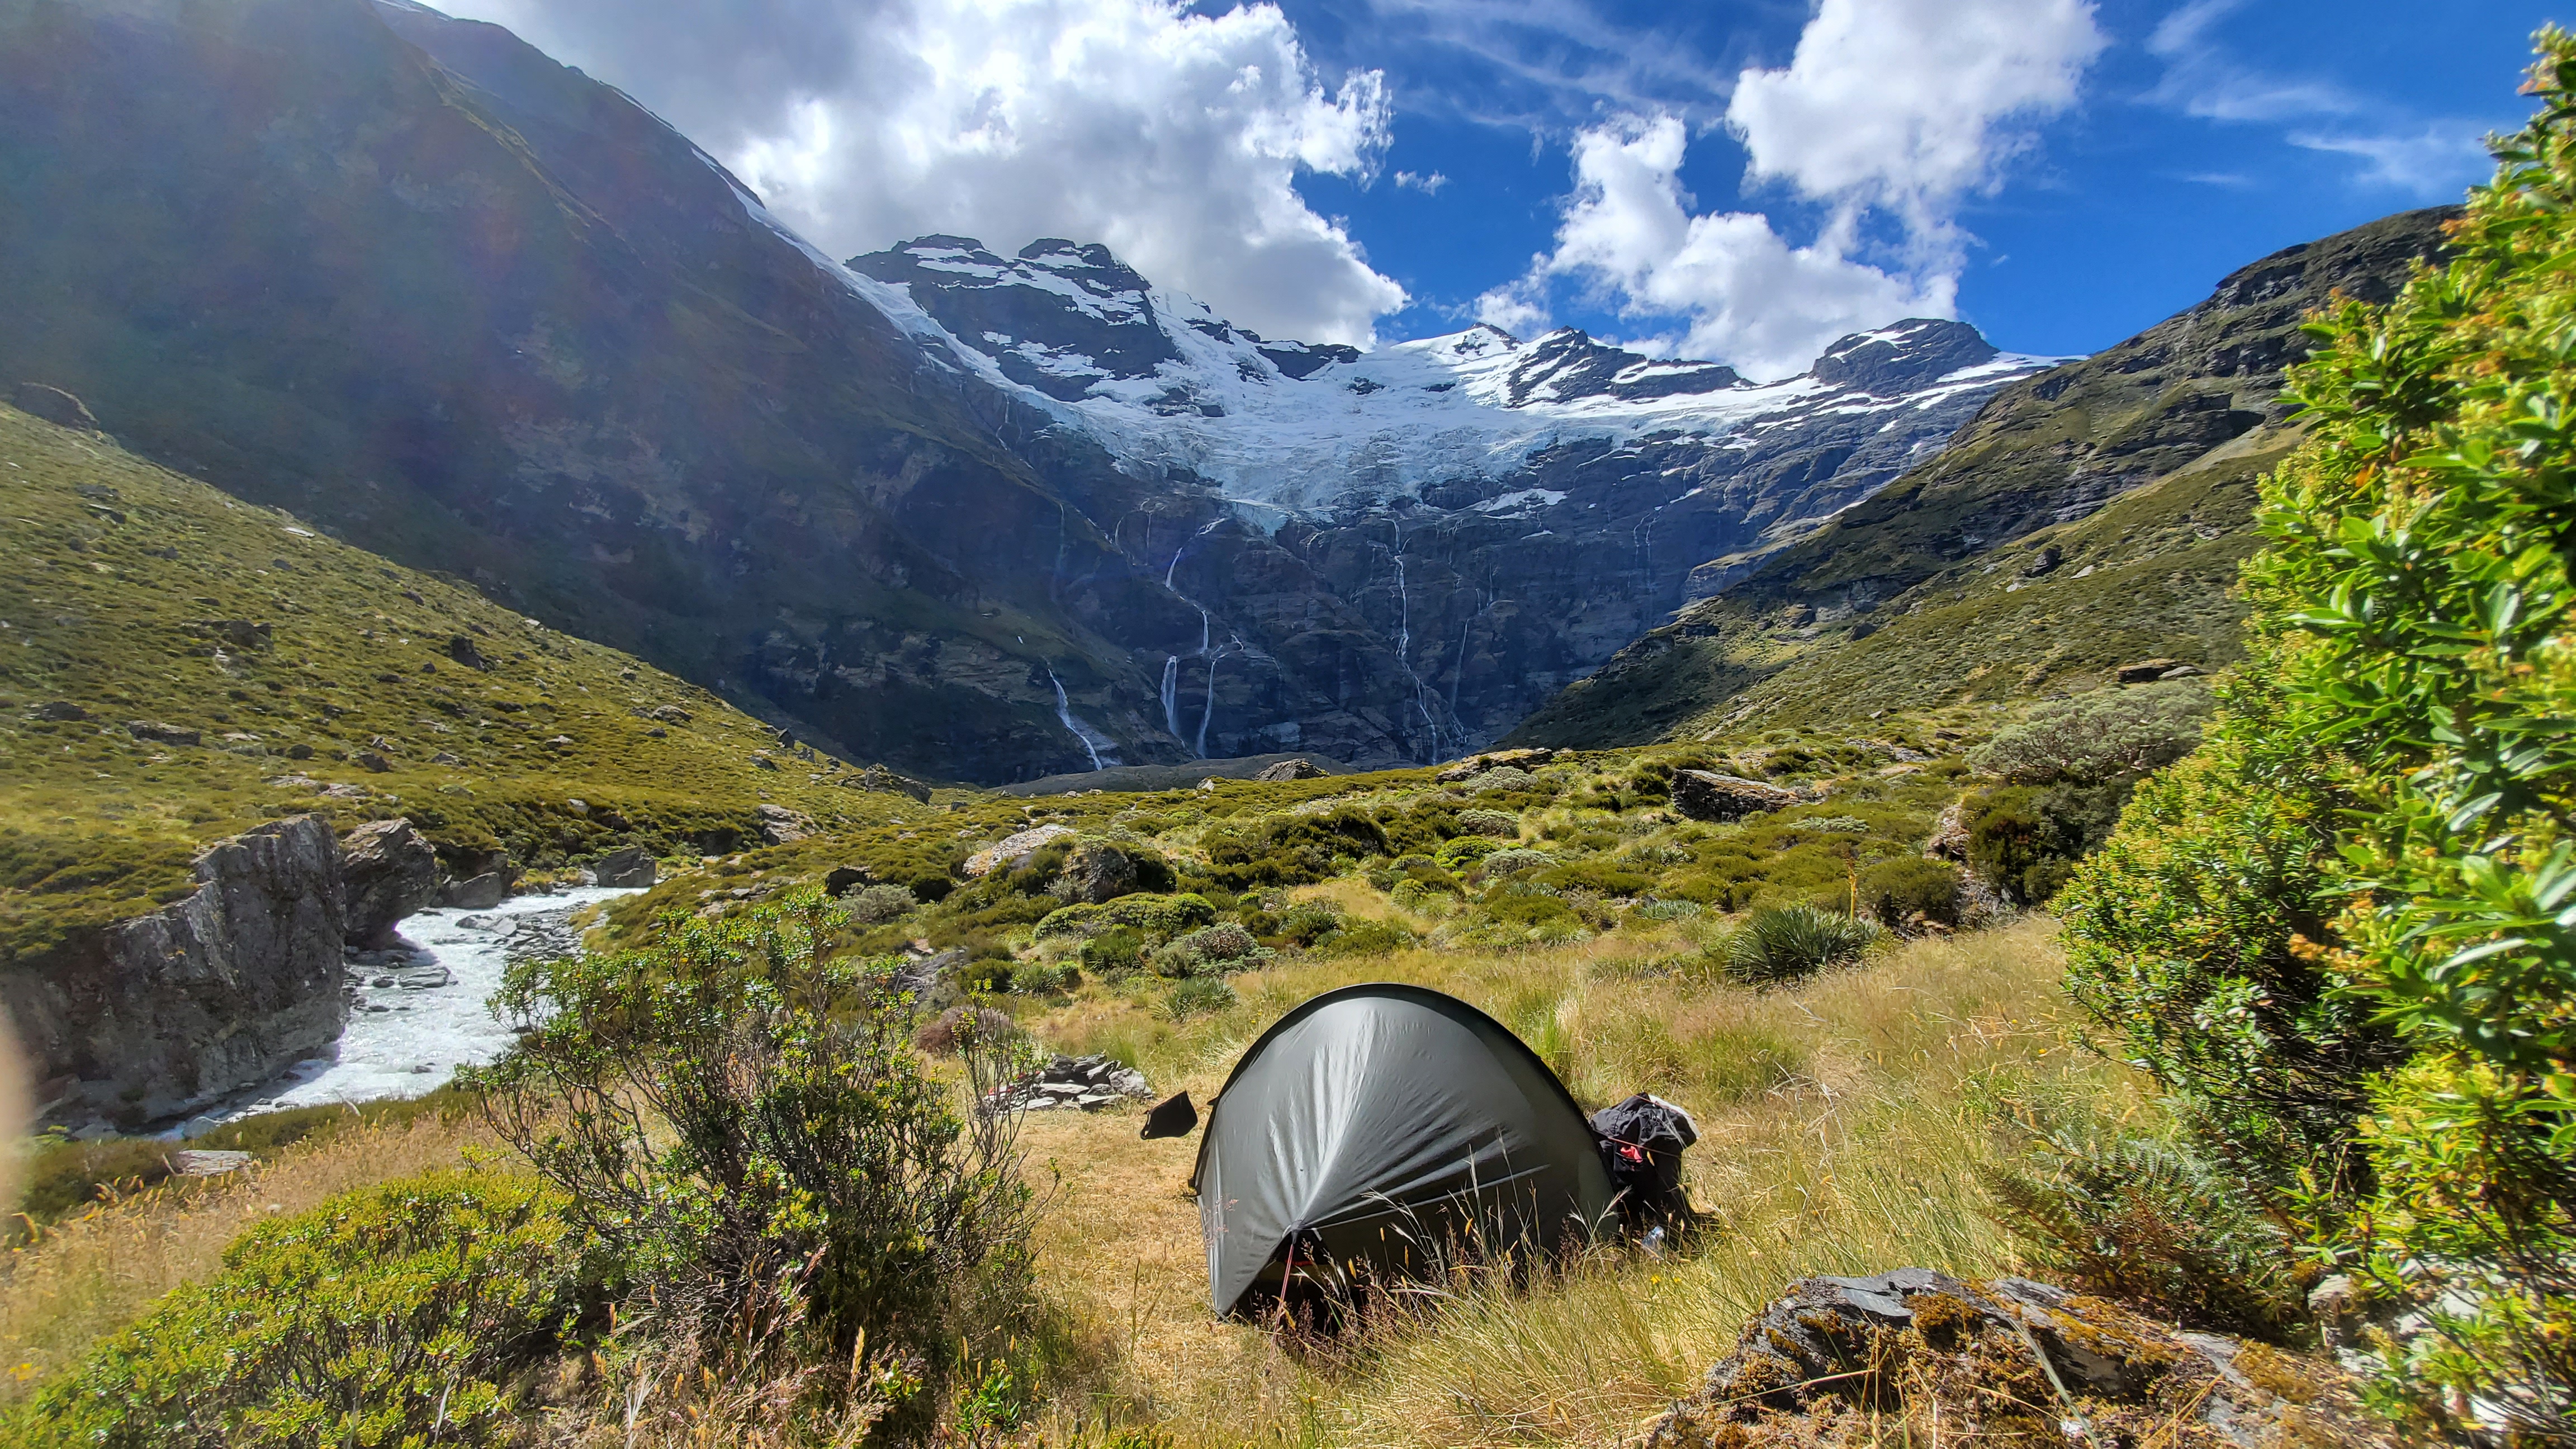 The perfect camp spot Mt Earnslaw